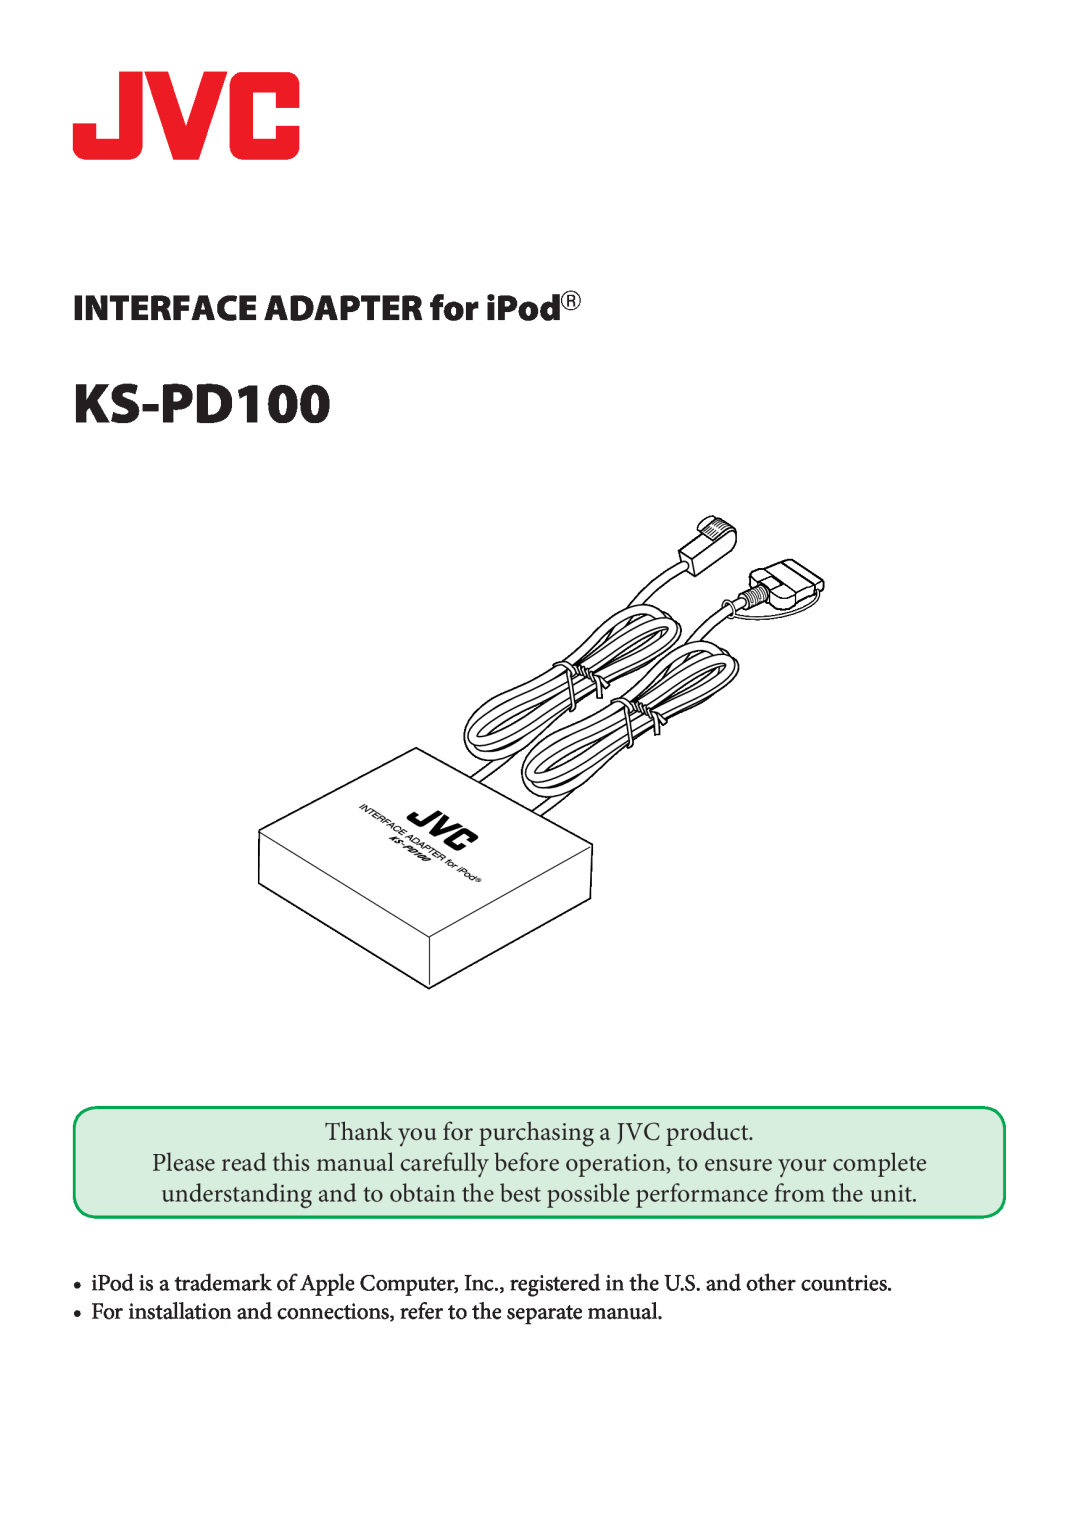 JVC KS-PD100 manual INTERFACE ADAPTER for iPodR, Thank you for purchasing a JVC product 